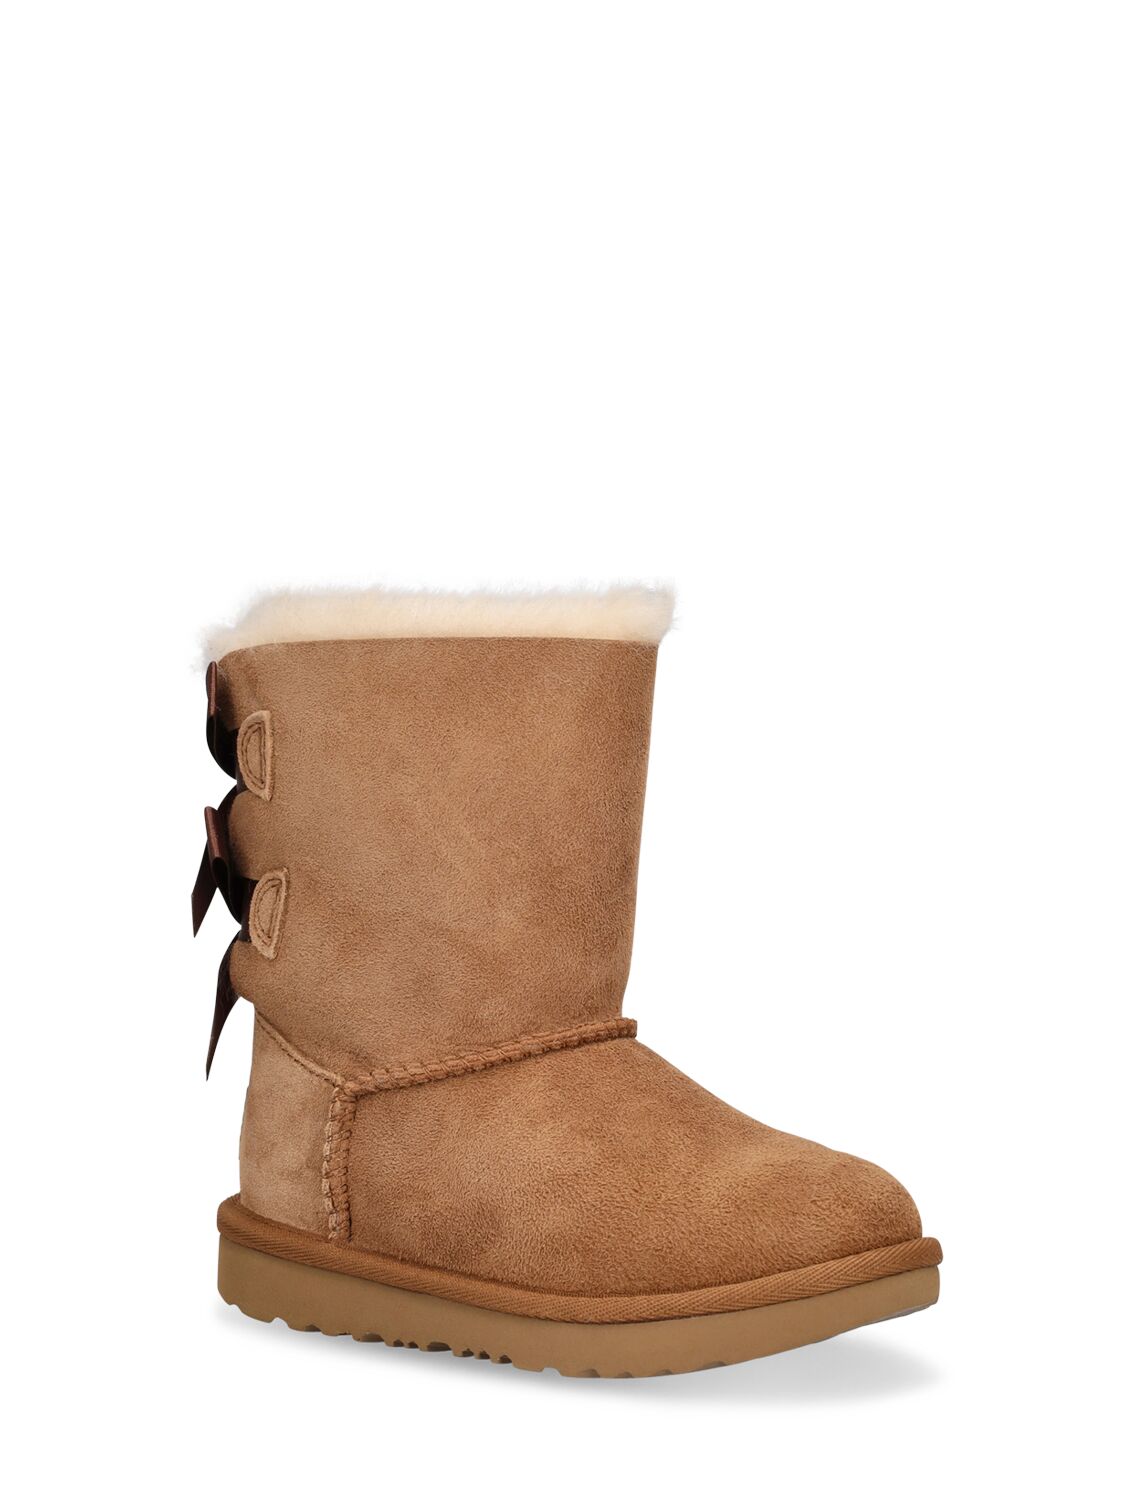 Shop Ugg Bailey Bow Ii Shearling Boots In Brown